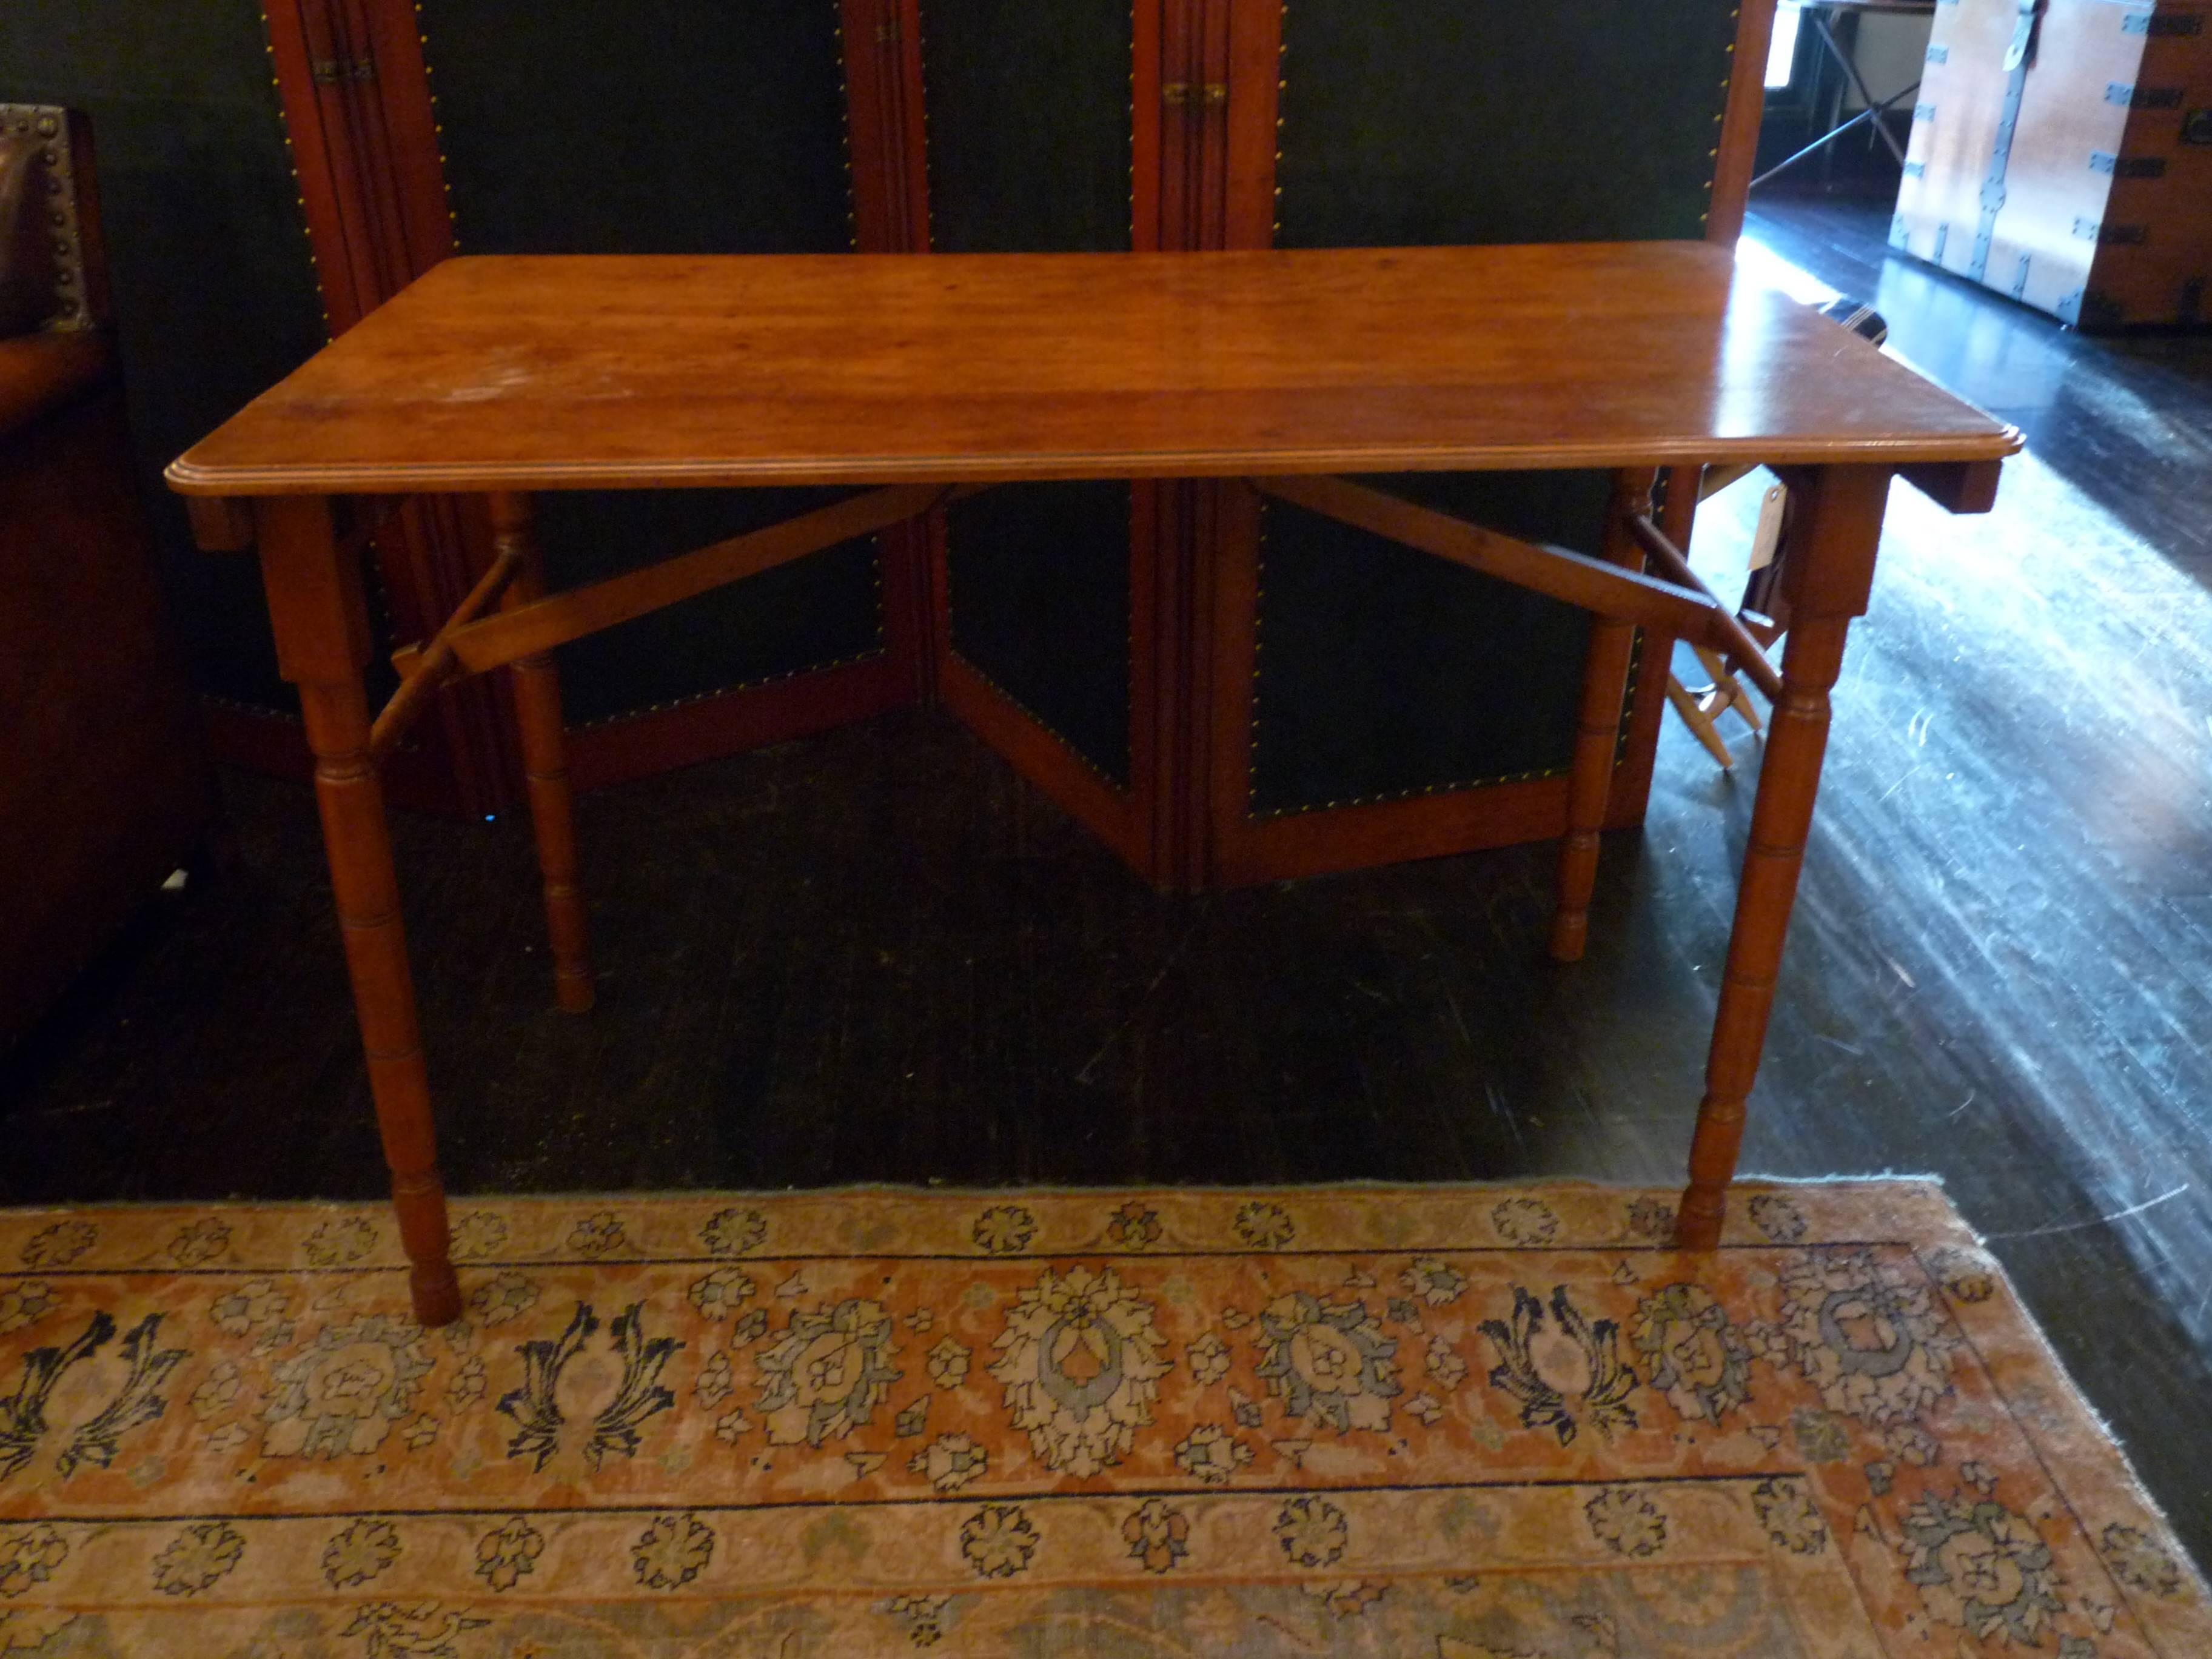 Fashioned out of mahogany, this late 19th century campaign folding table has likely traveled the world or at least graced the outdoor picnics of an English estate. Both practical and beautiful, this table is a great functional piece . 